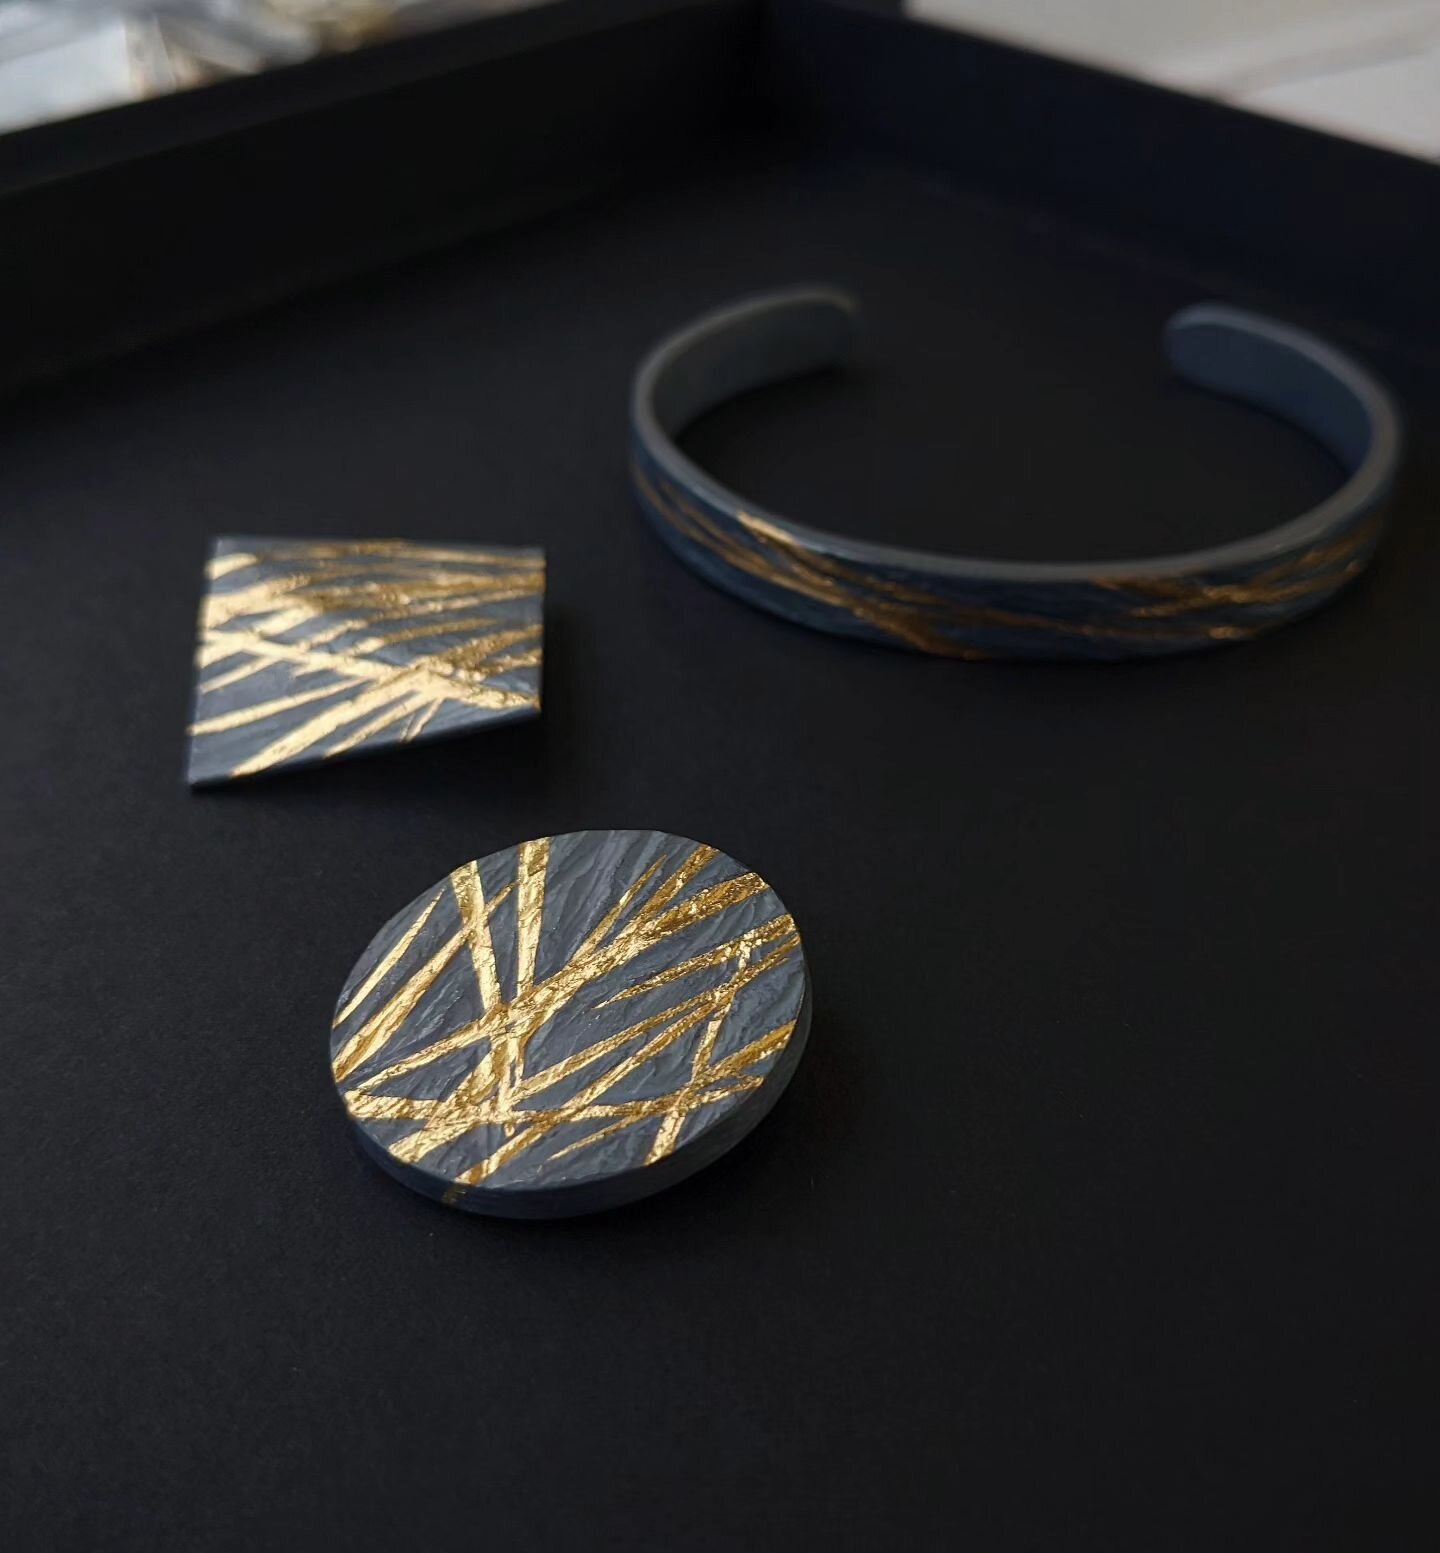 Some new bits. And many more bits to finish... Getting really excited about Elements! Open Friday 27th - Sunday 29th October at @lyonandturnbull, Broughton Place, Edinburgh 

For more info see @scottishgoldsmithstrust